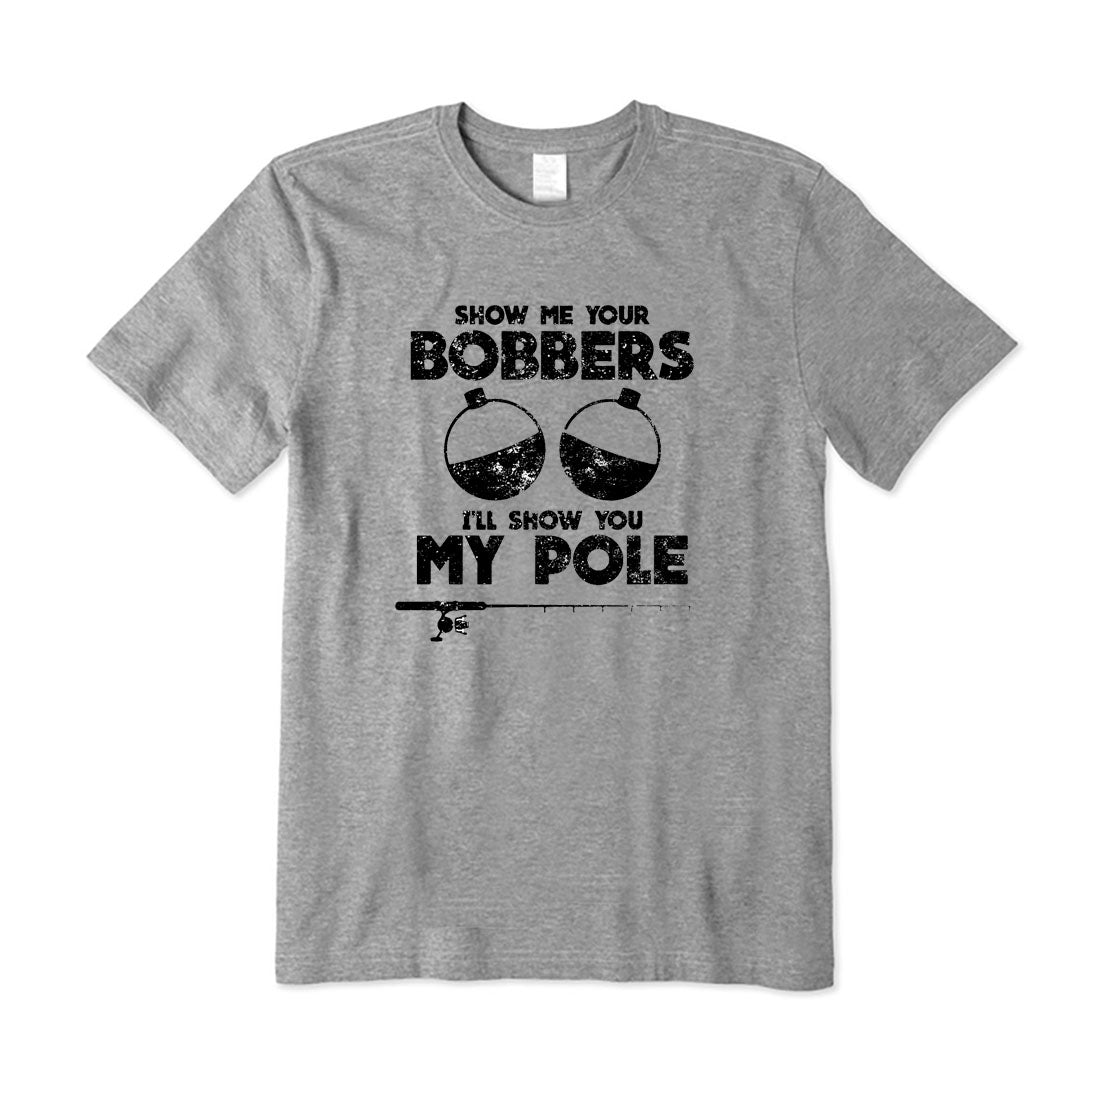 Show me your bobbers T-Shirt